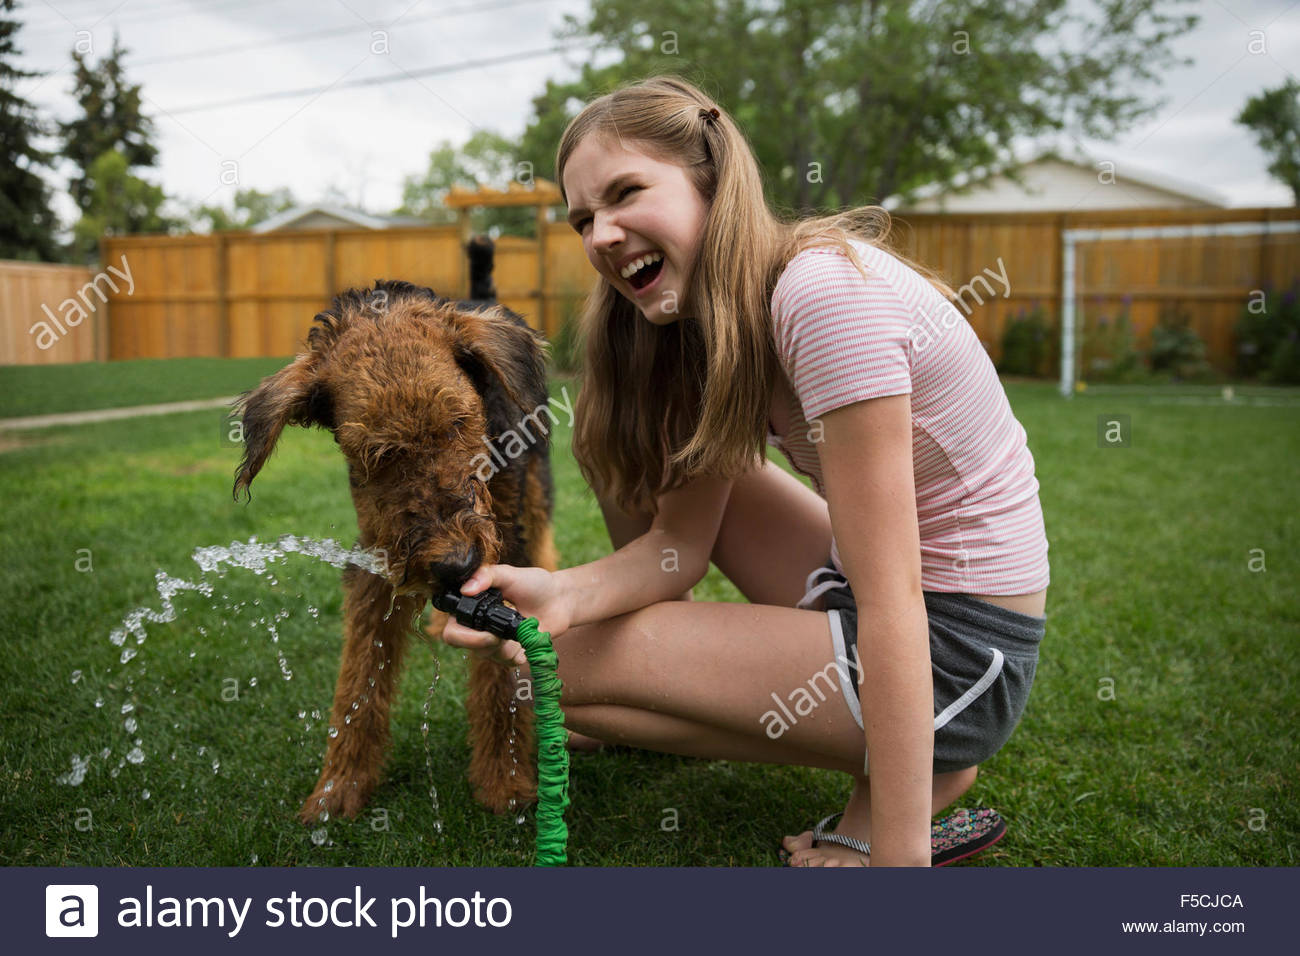 Laughing girl holding hose for dog drinking water Stock Photo